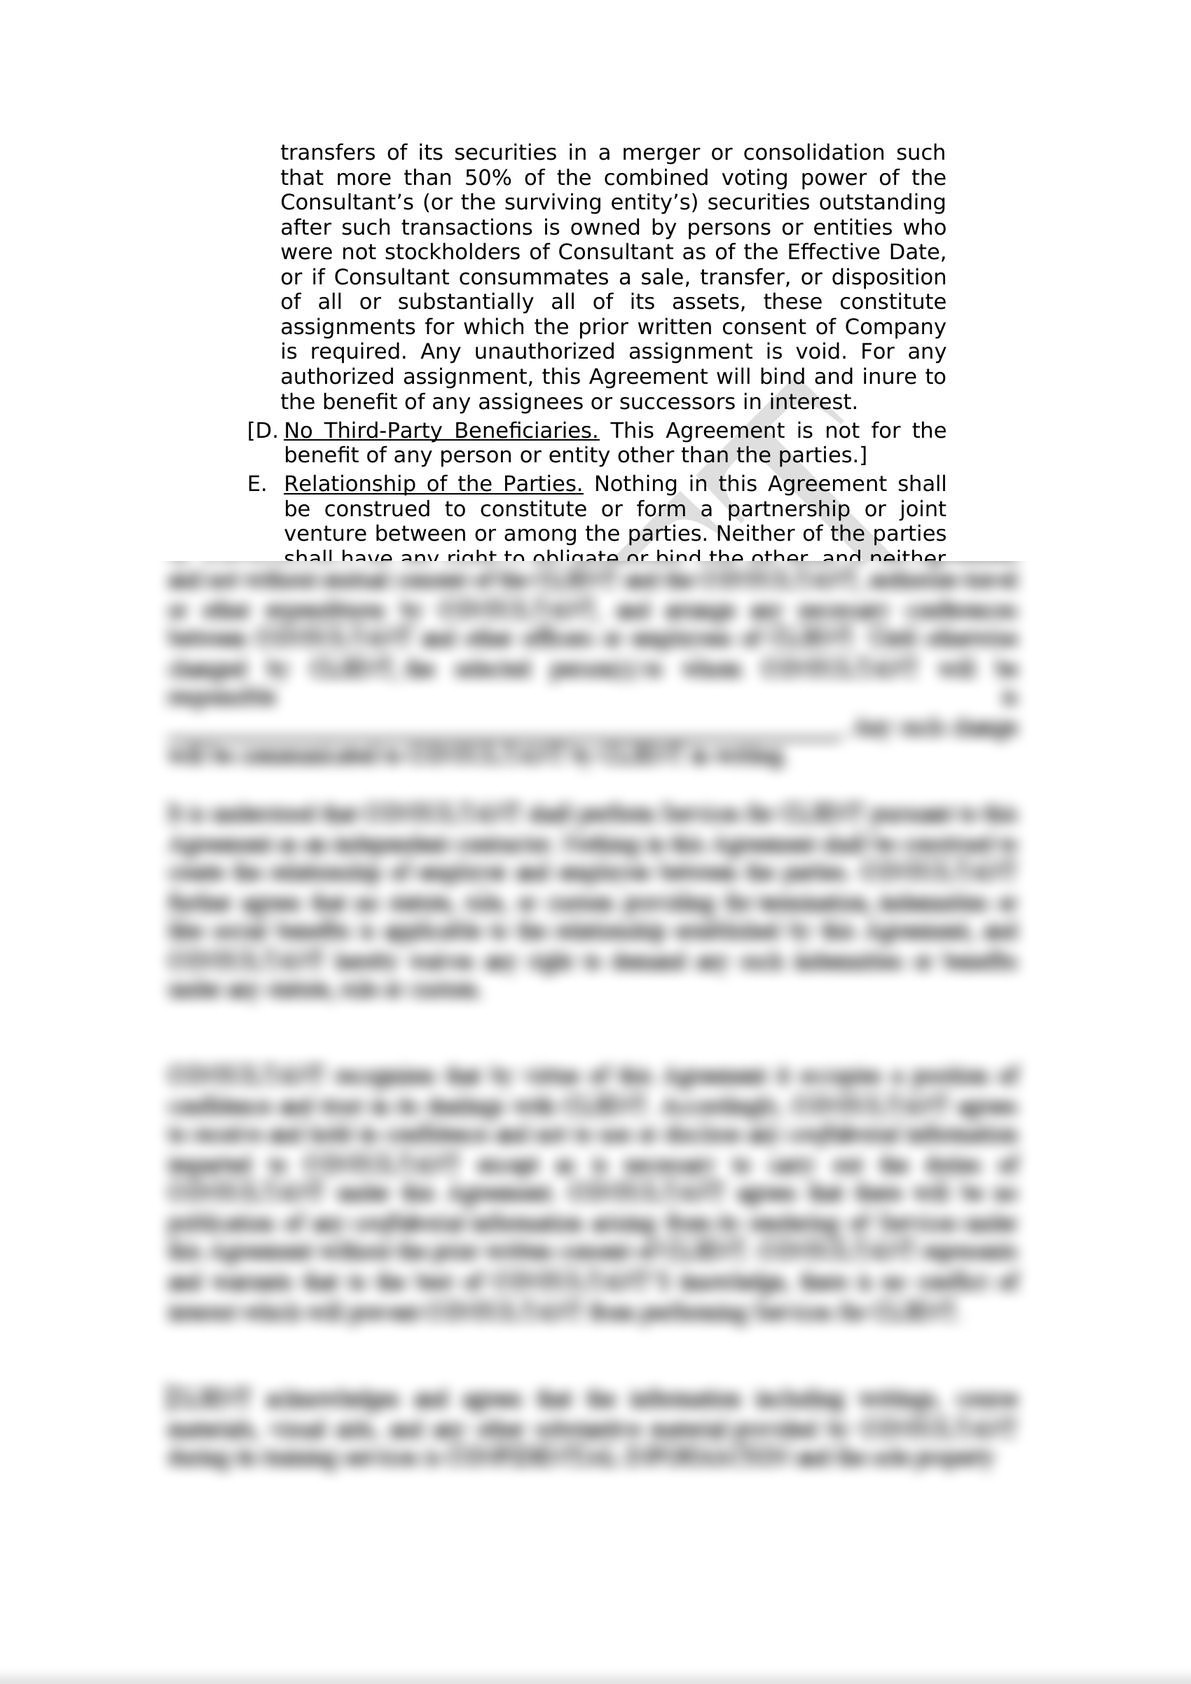 Consulting Agreement (IP Context)-7